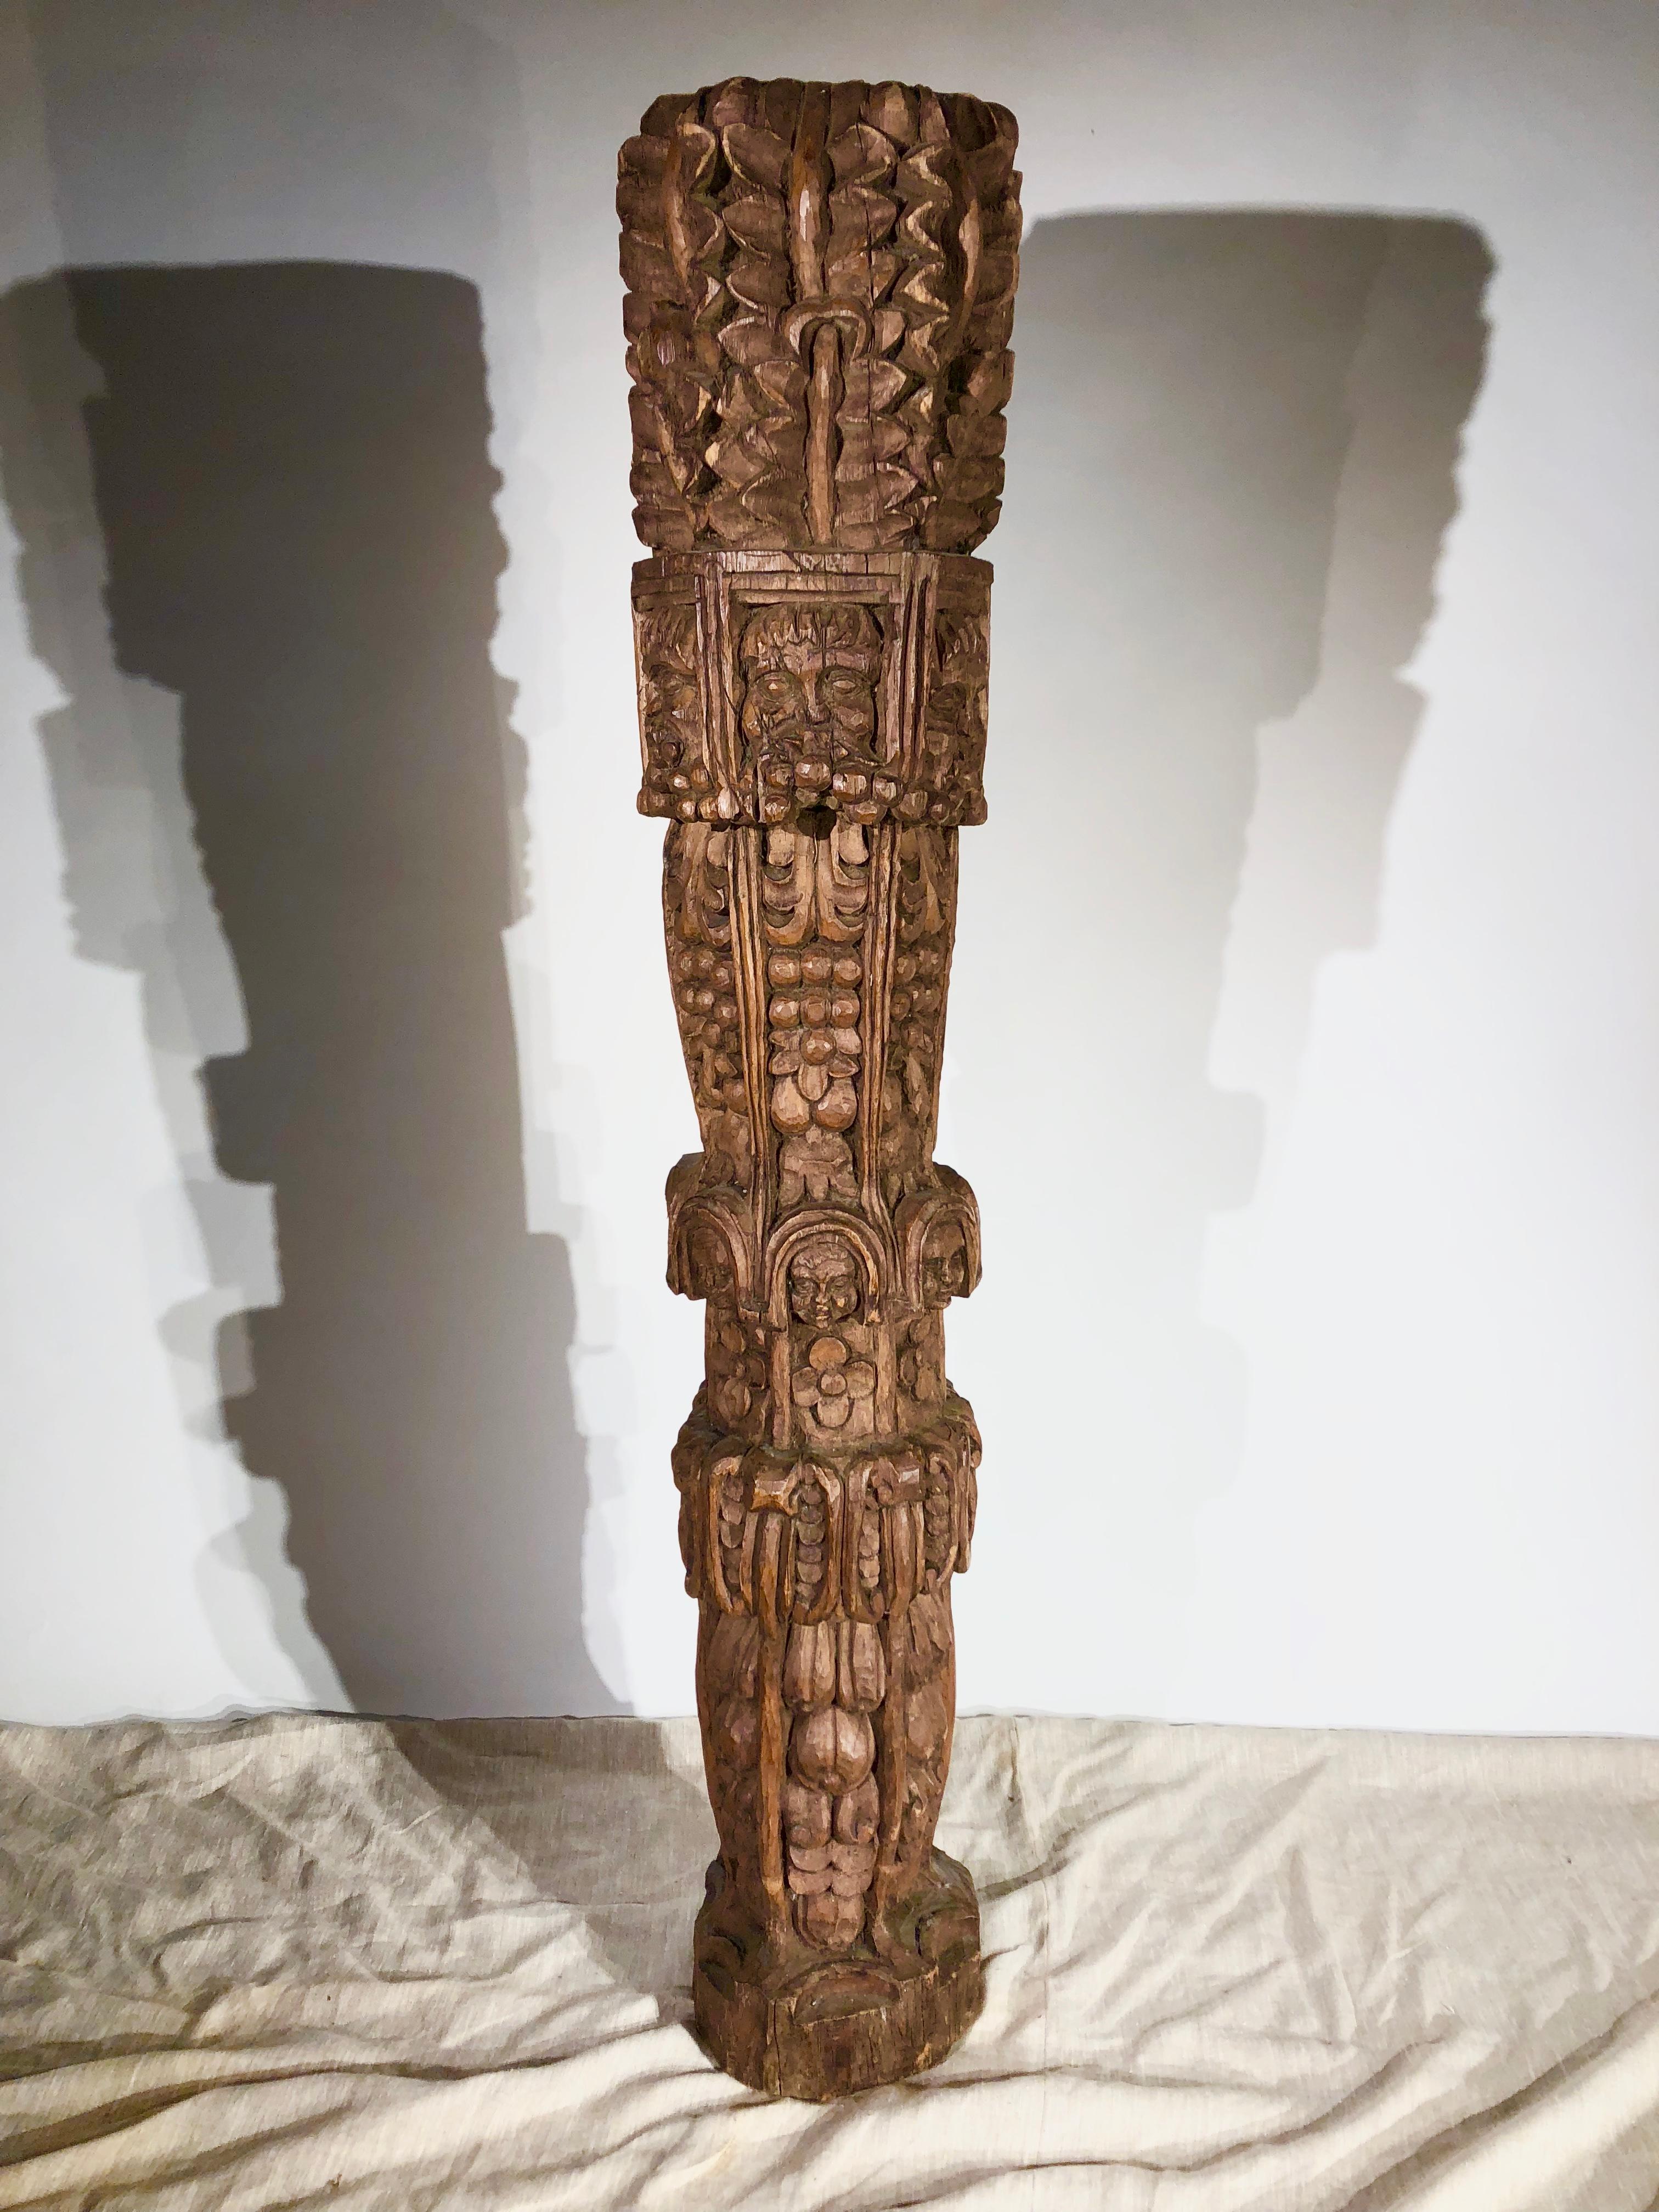 An elaborately carved architectural column in oak, possibly 18th century or earlier, English.